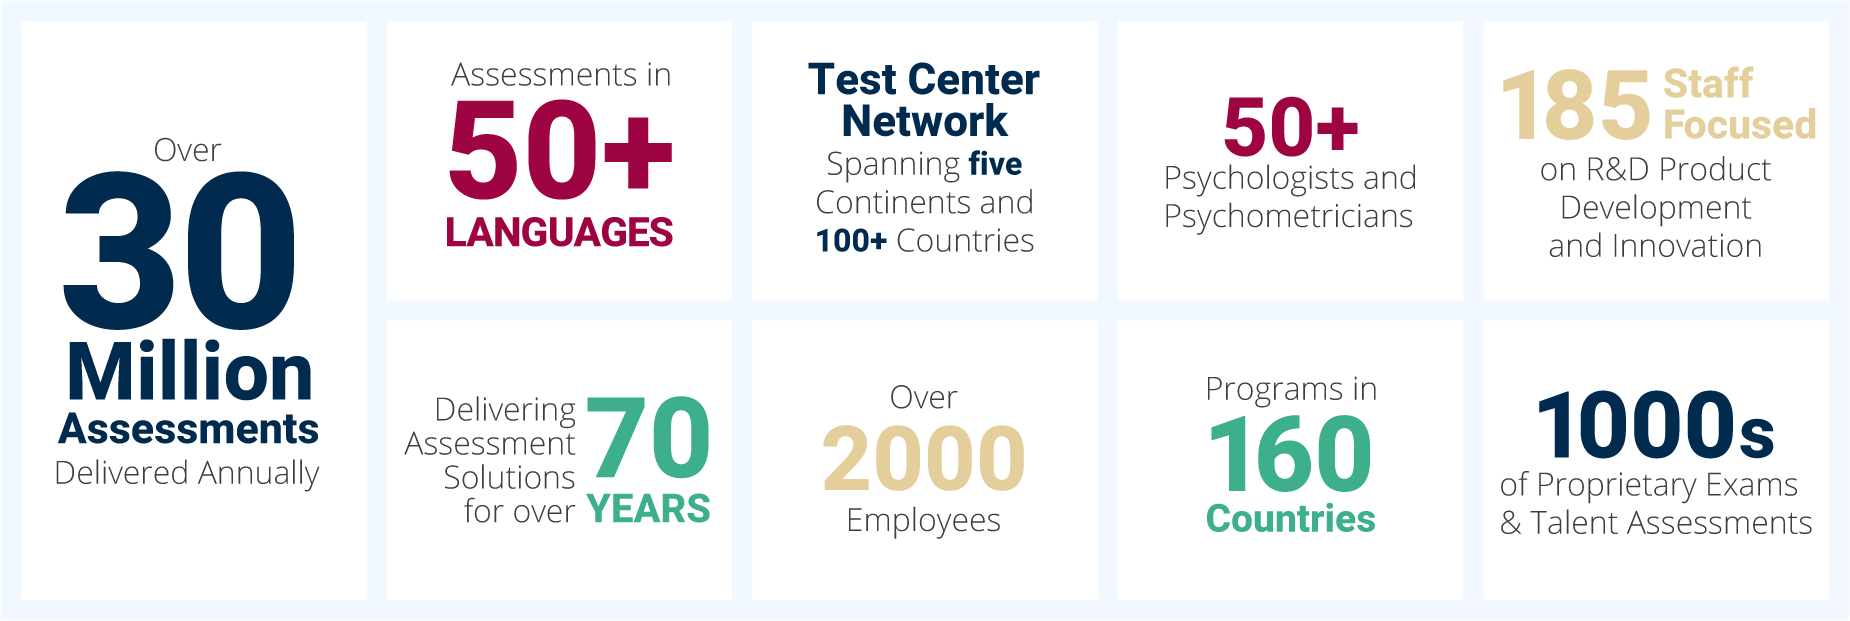 Over 30 Million Assessments Delivered Annually,
Delivering Assessment Solutions for Over 70 Years, 50+ Psychologists and Psychometricians, 185 Staff Focused on Research & Development, Product Development and Innovation, Assessments in 50+ Languages, 2000+ Employees, Test Center Network Spanning 5 Continents and 100+ Countries, Programs in 160 Countries, 1000s of Proprietary Exams and Talent Assessments